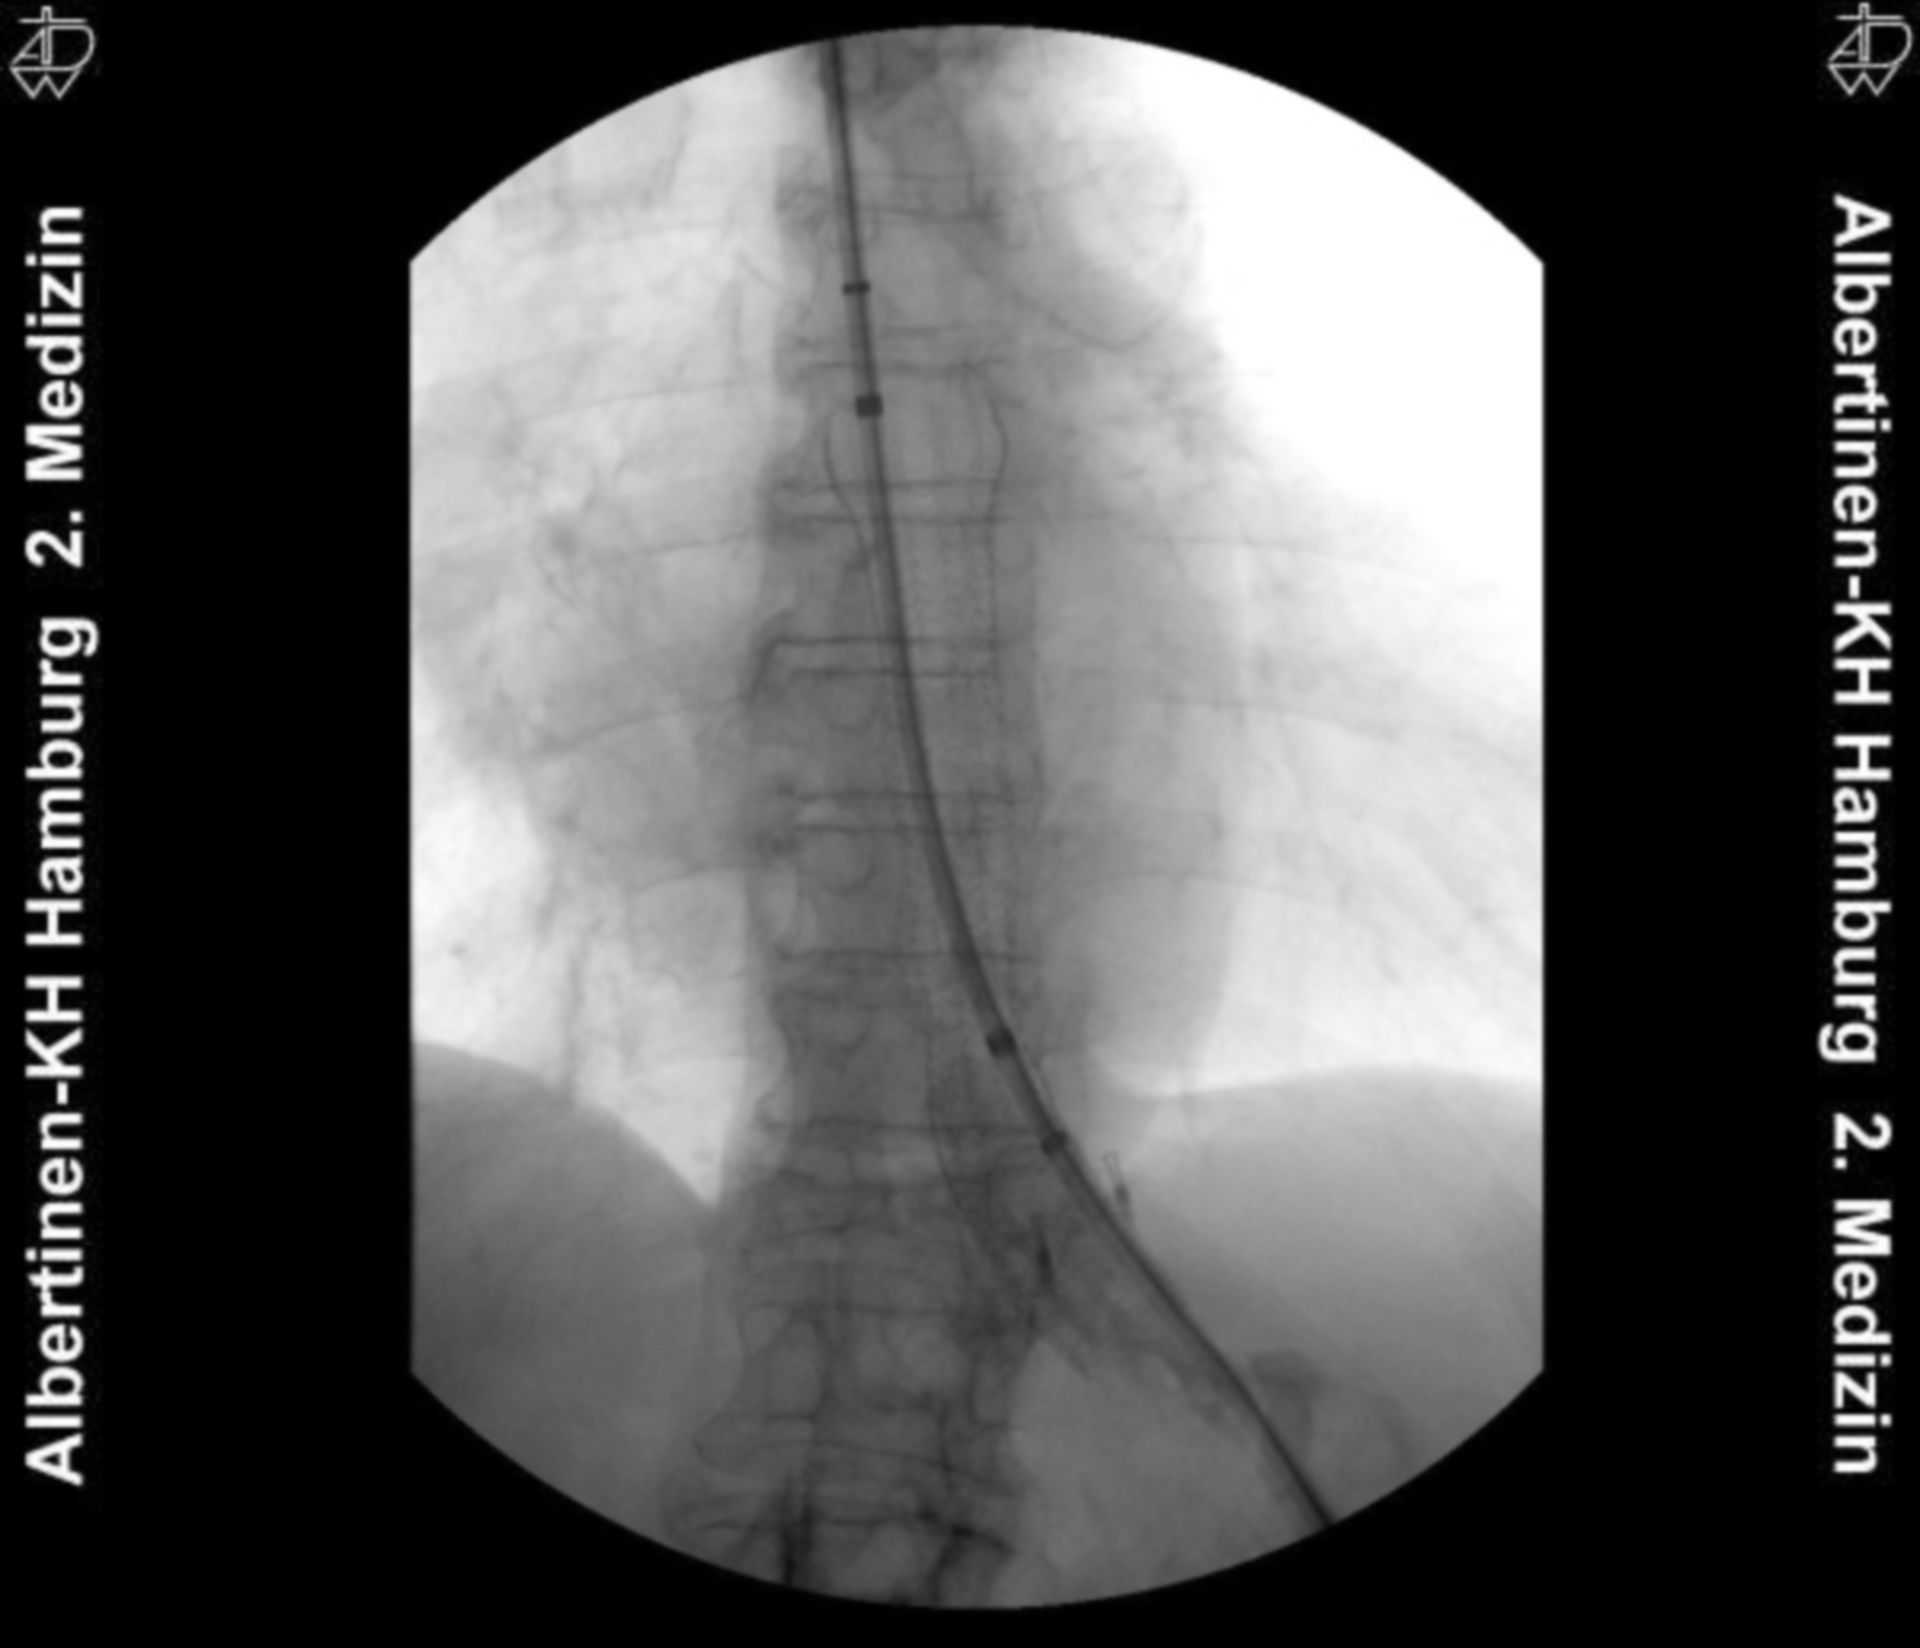 Esophagus stent: Release